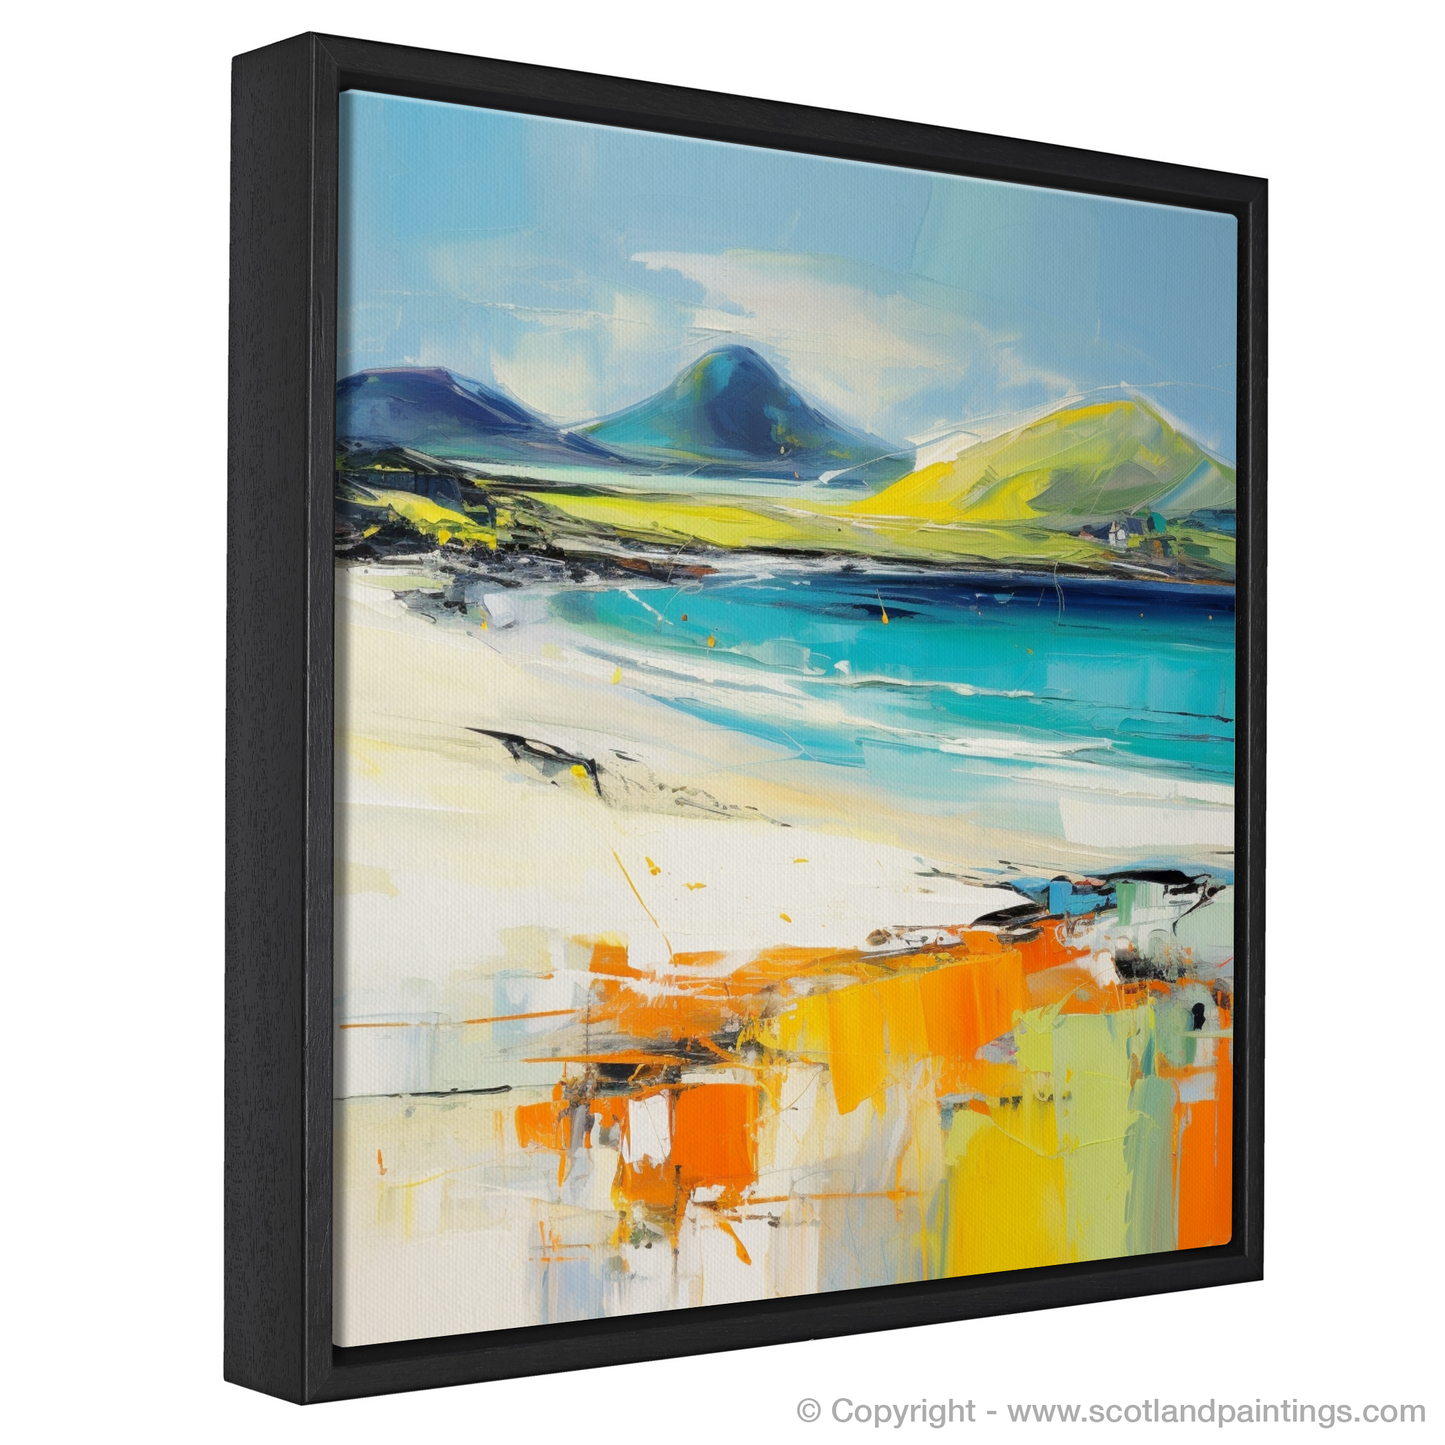 Painting and Art Print of Luskentyre Beach, Isle of Harris entitled "Luskentyre Beach Resonance: An Abstract Ode to Scottish Shores".